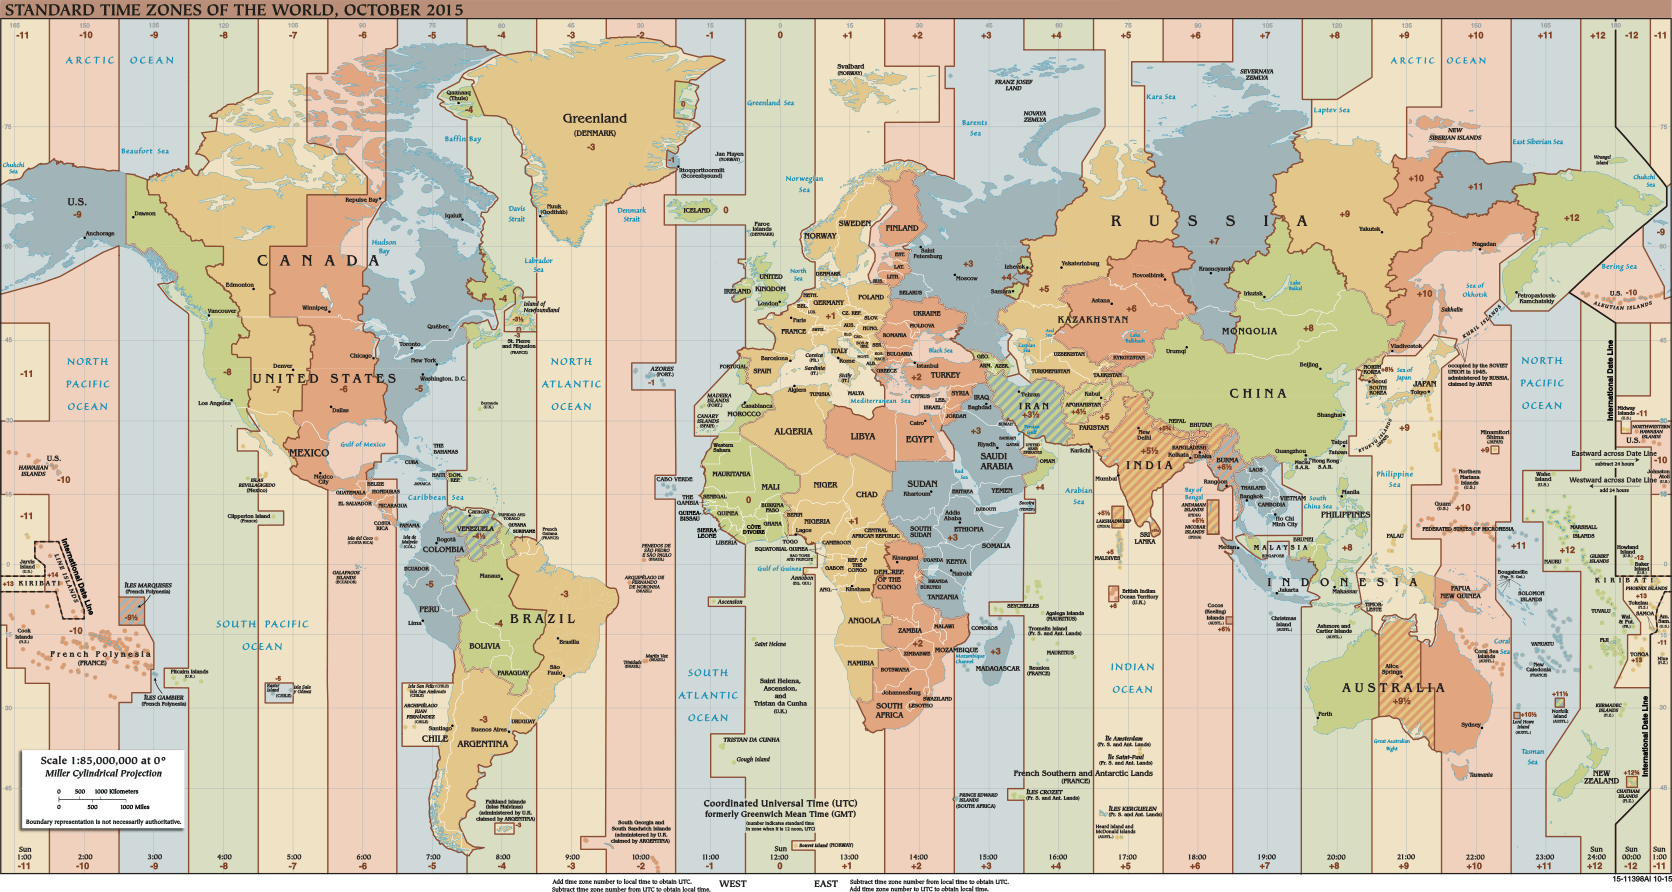 Standard Time Zones Of The World October 2015.svg  ?fit=1672%2C892